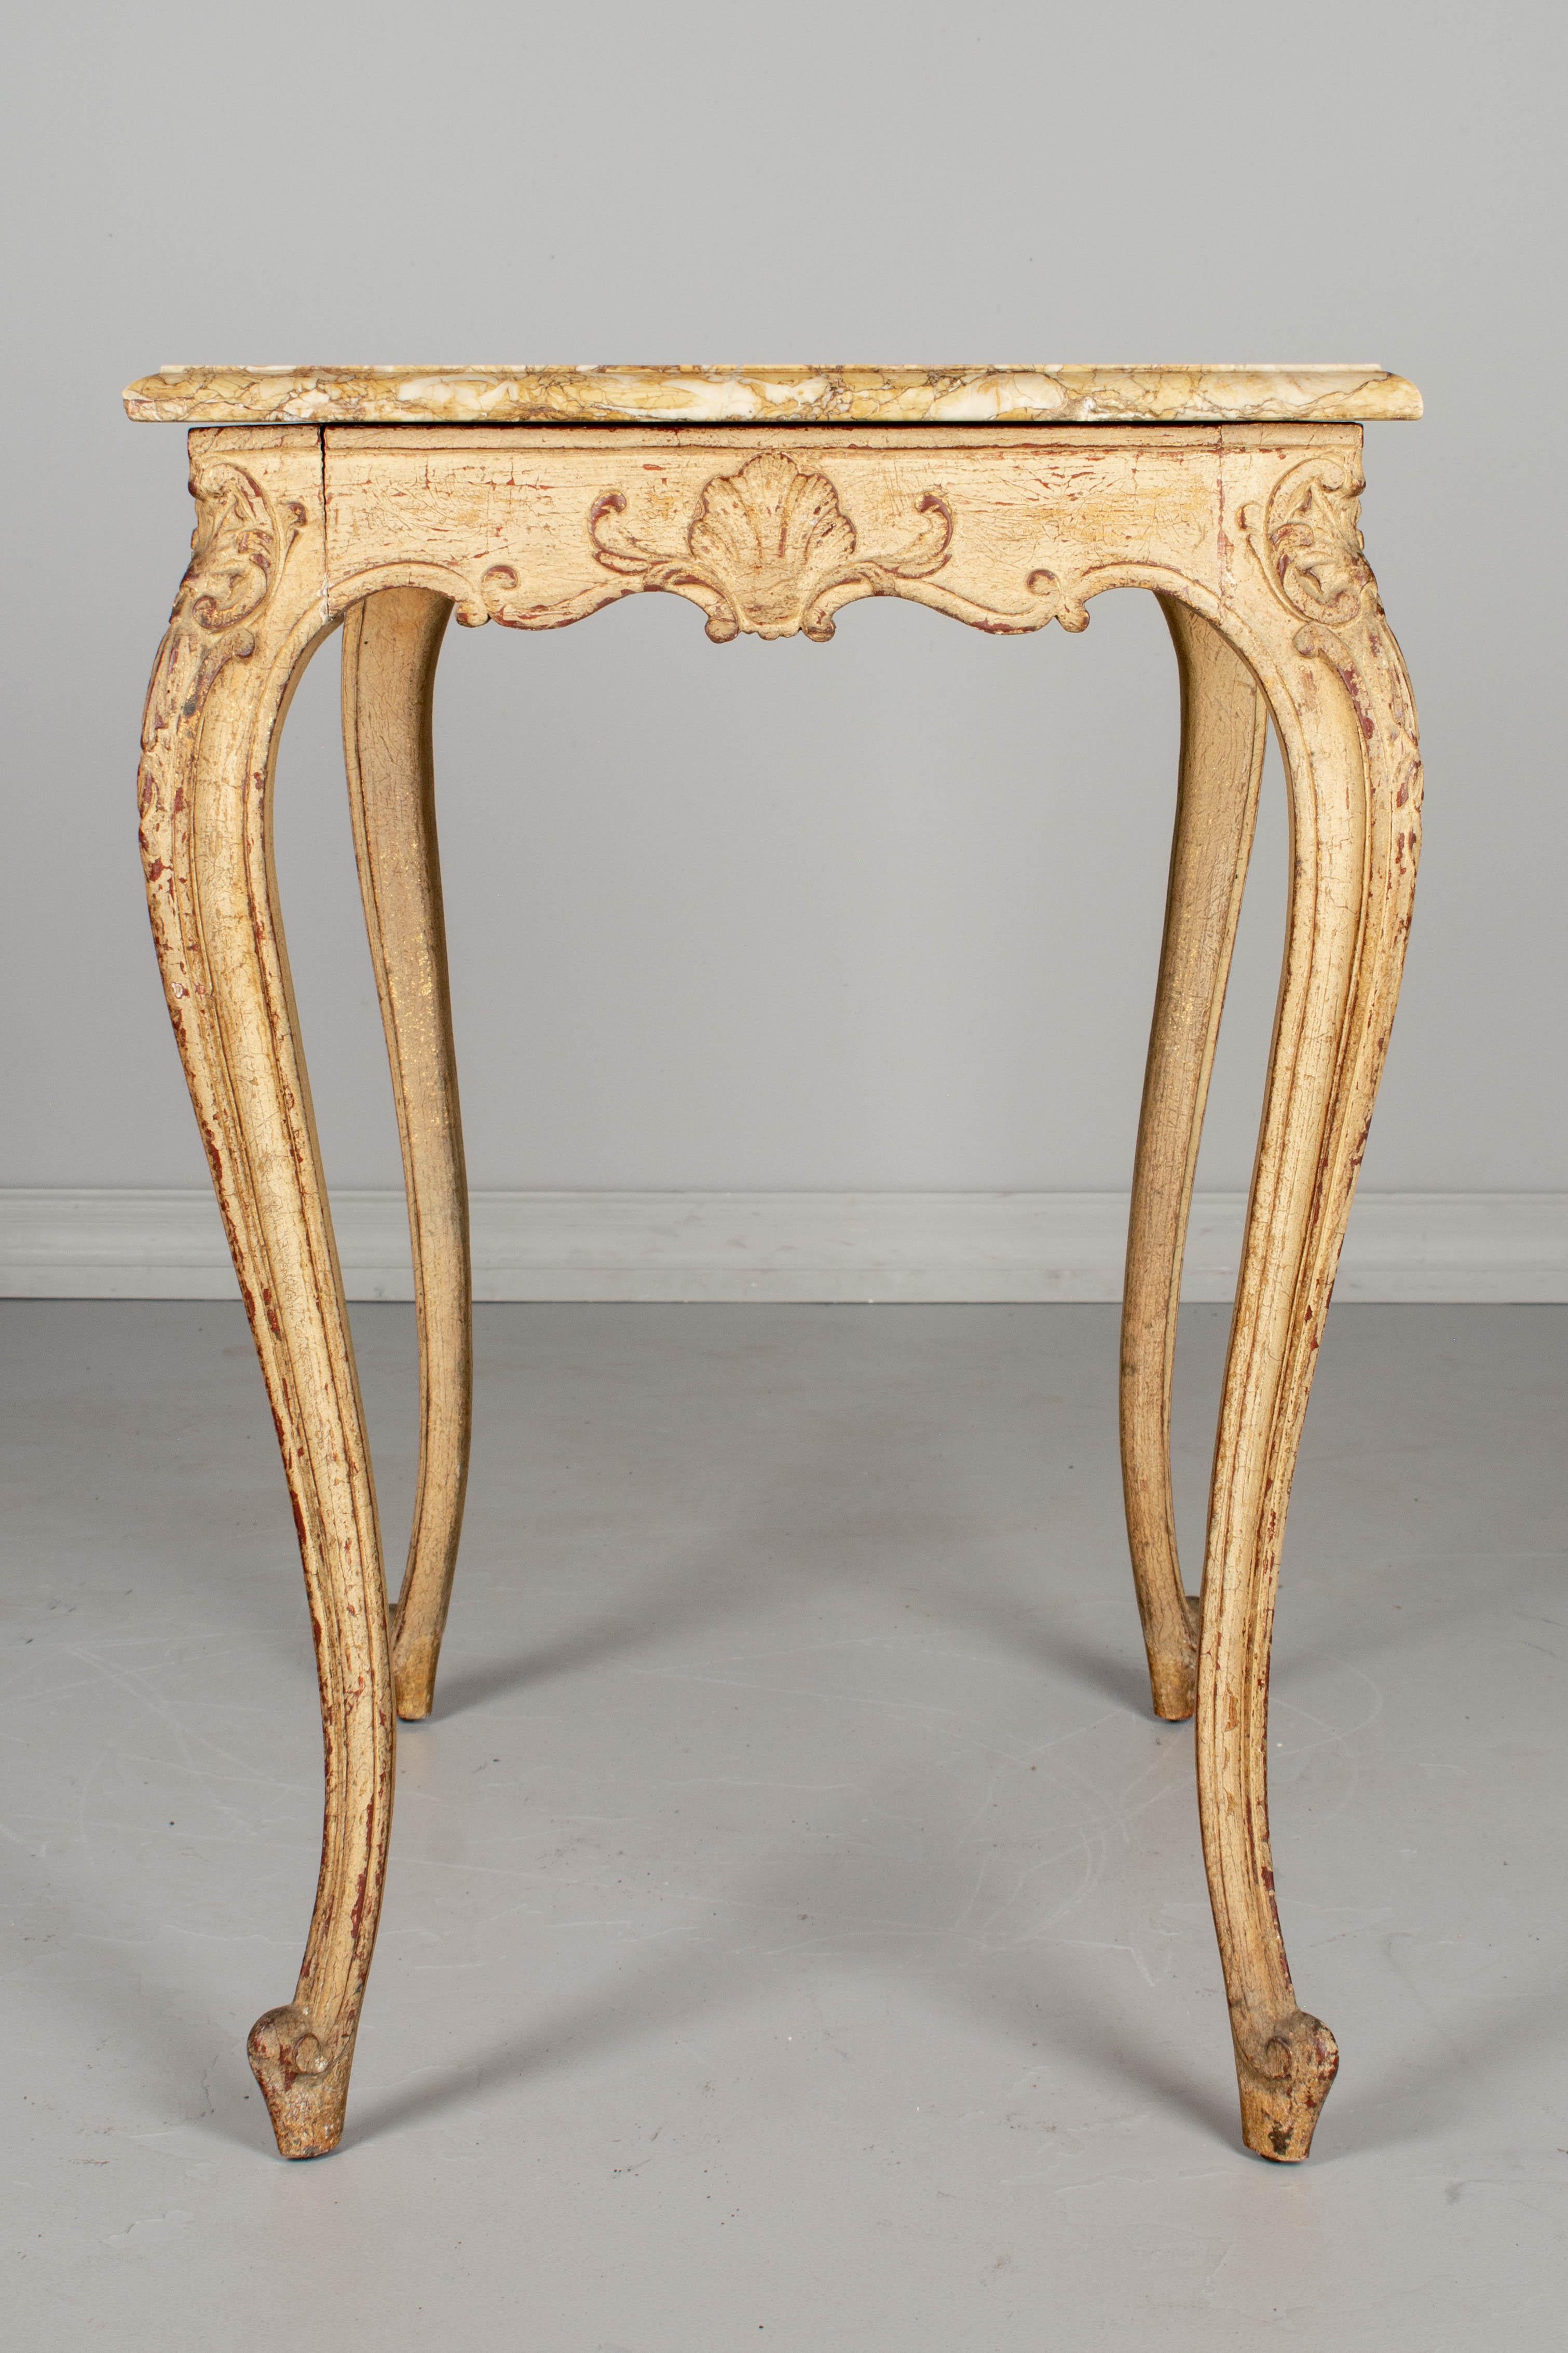 Early 20th c French Louis XV Style Marble-Top Table For Sale 2